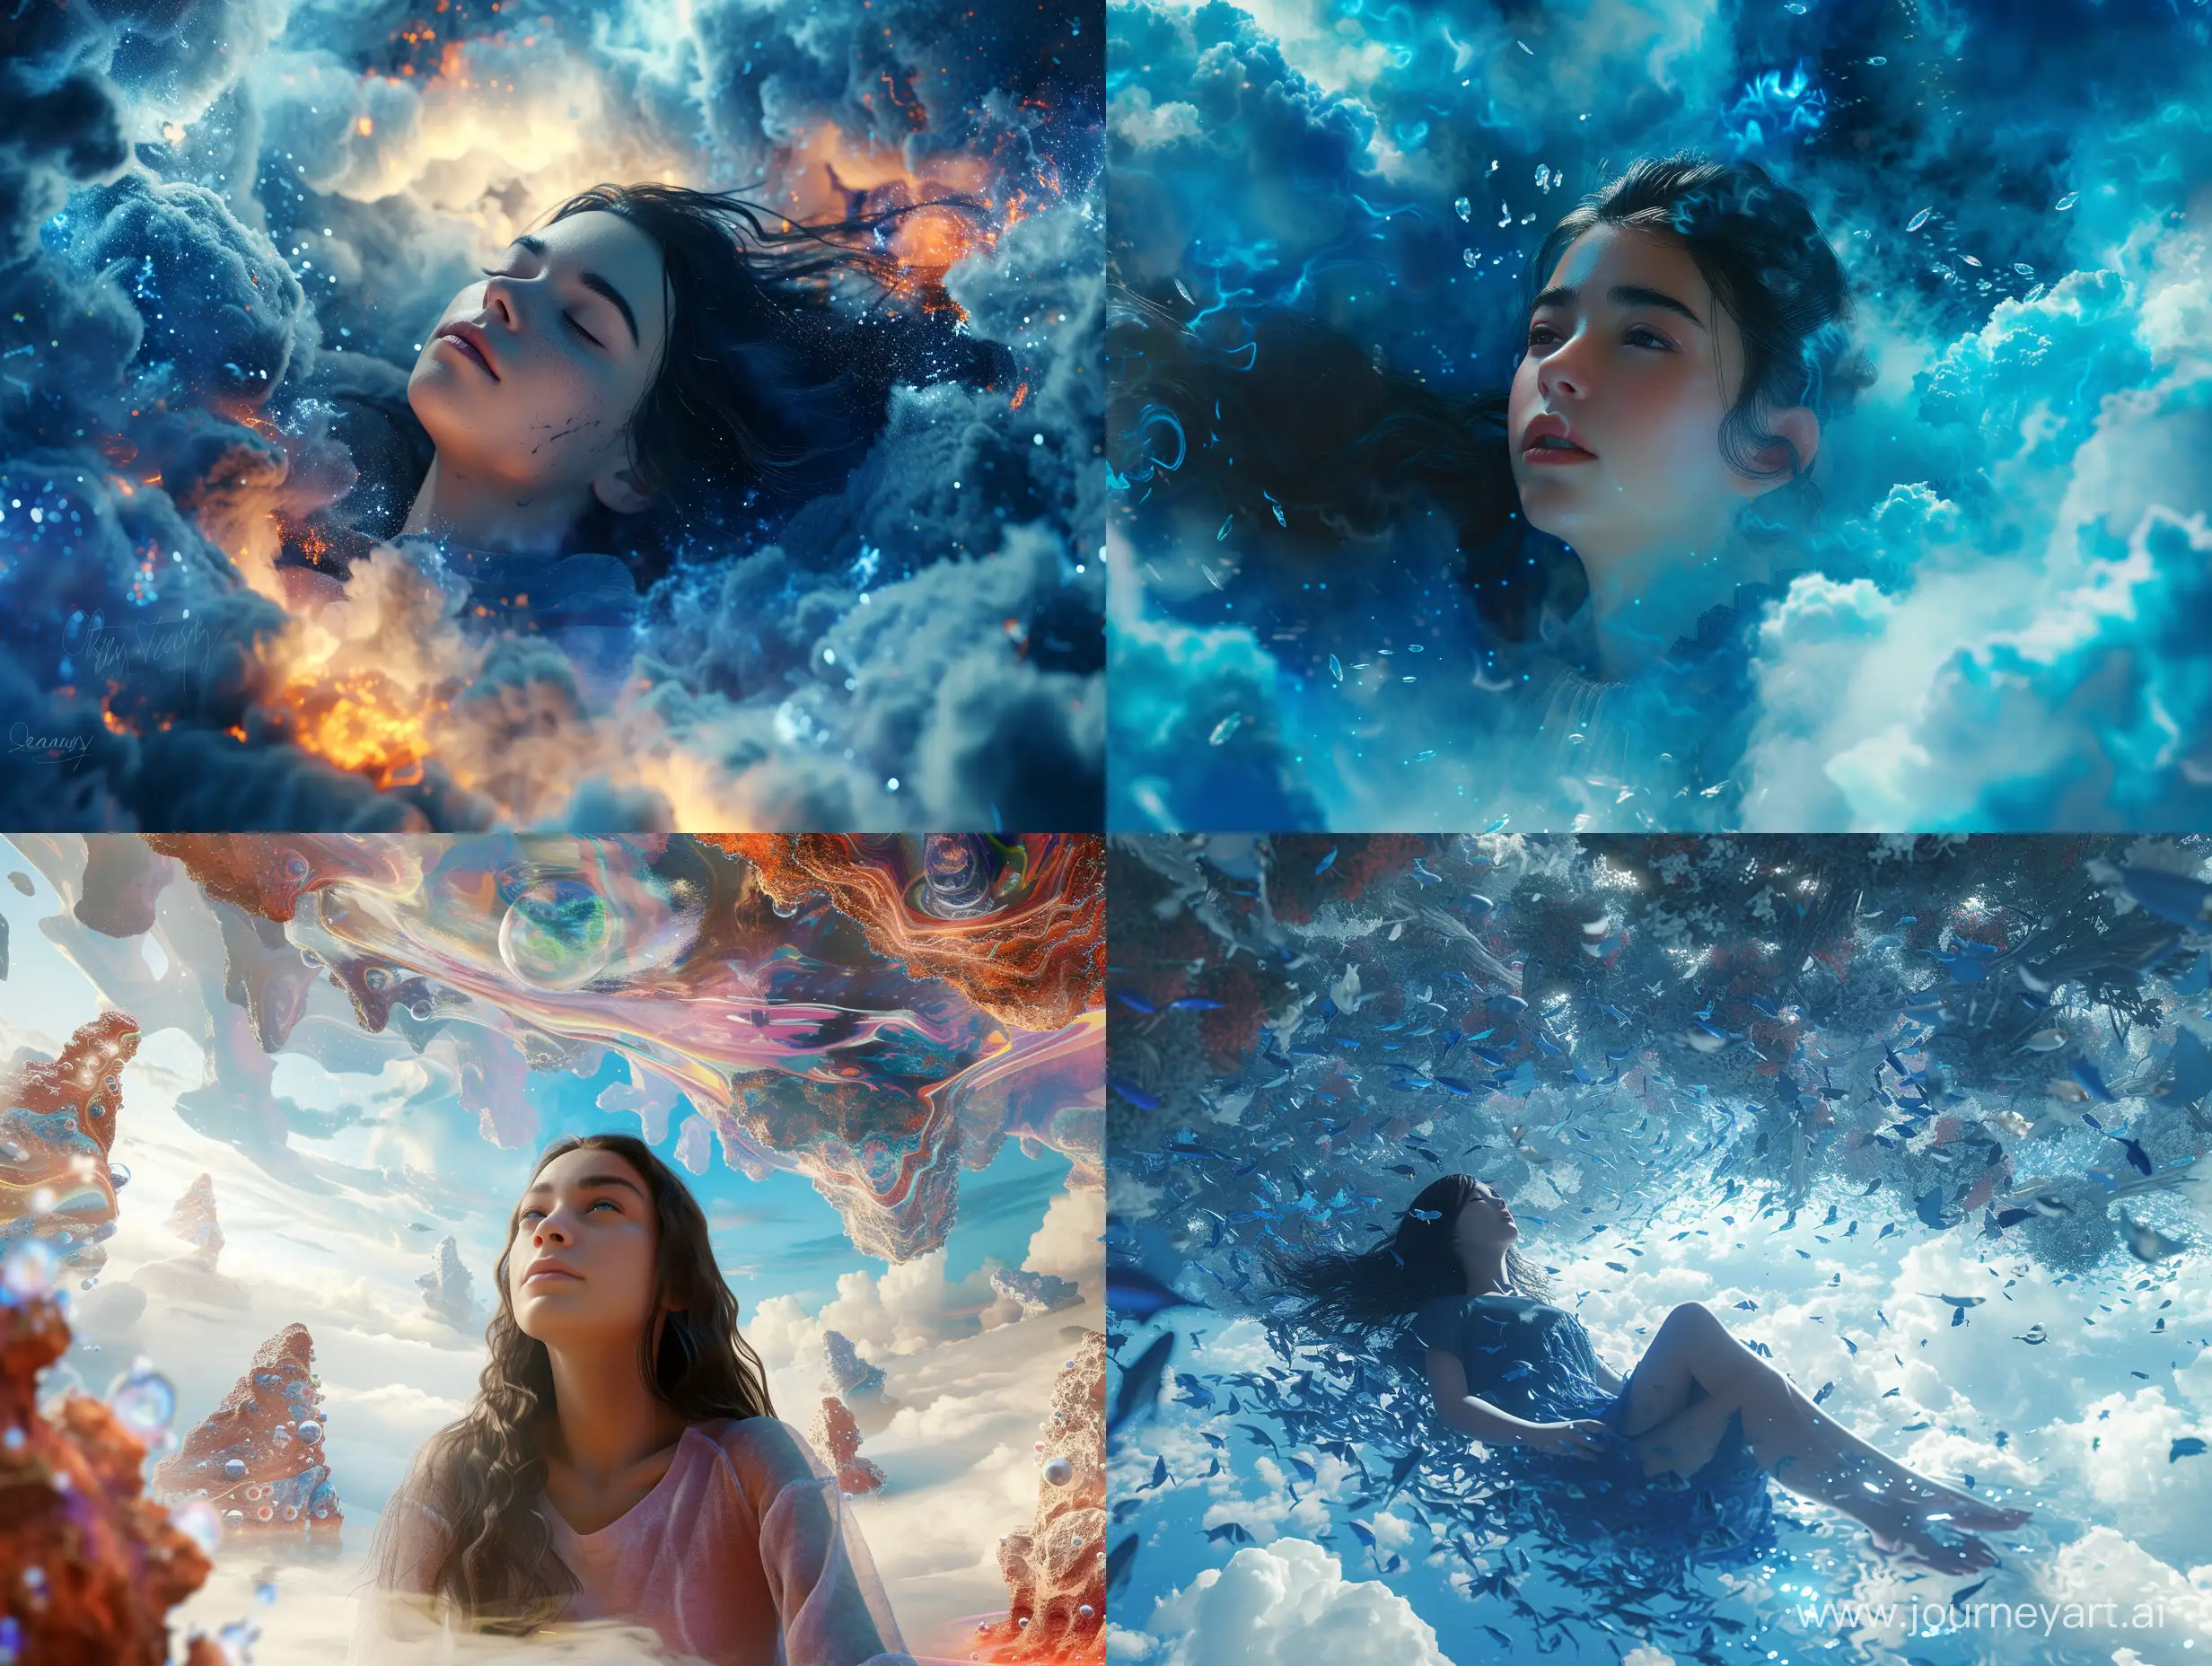 Dreamy Vision background a woman immersed in a dream, where reality blends with fantasy. A unique journey through the realm of dreams, where imagination flourishes and evokes thought on human nature and the creative process. Concept art and render on par with the finest digital works on ArtStation, a breathtaking vision brought to life through Unreal Engine and technical virtuosity